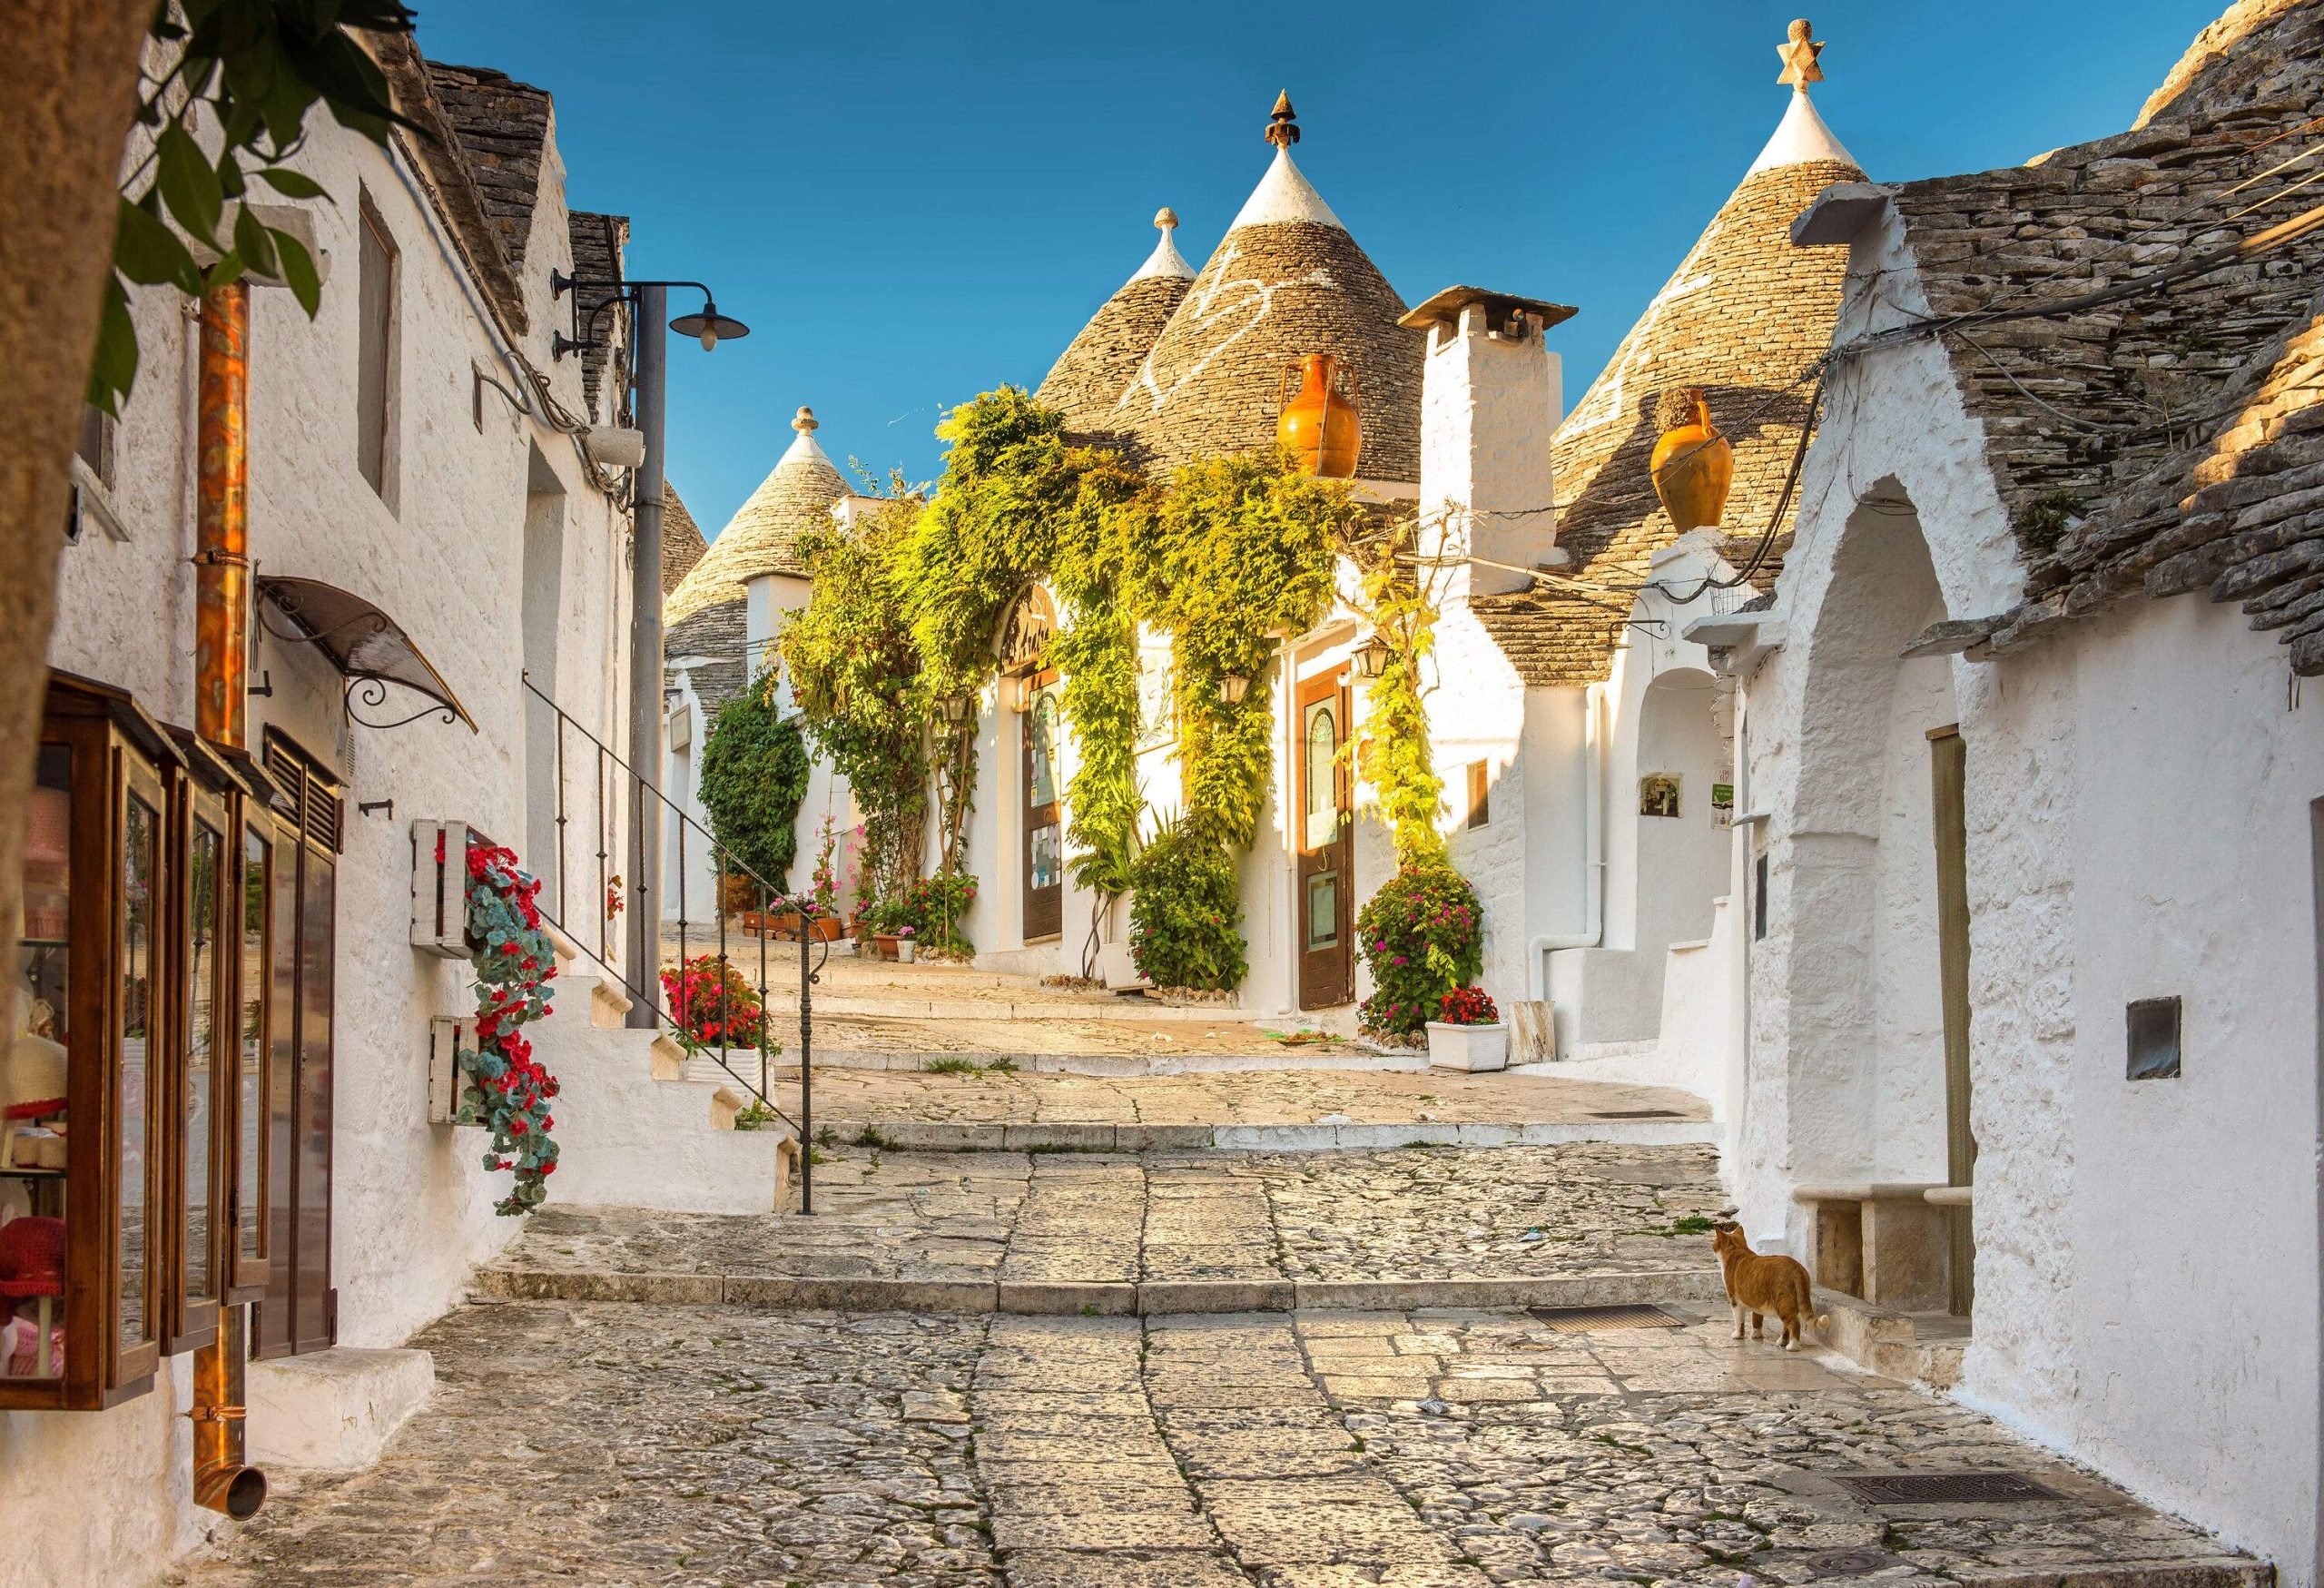 A cobbled sloping pathway in the middle of coned-roof trulli houses.